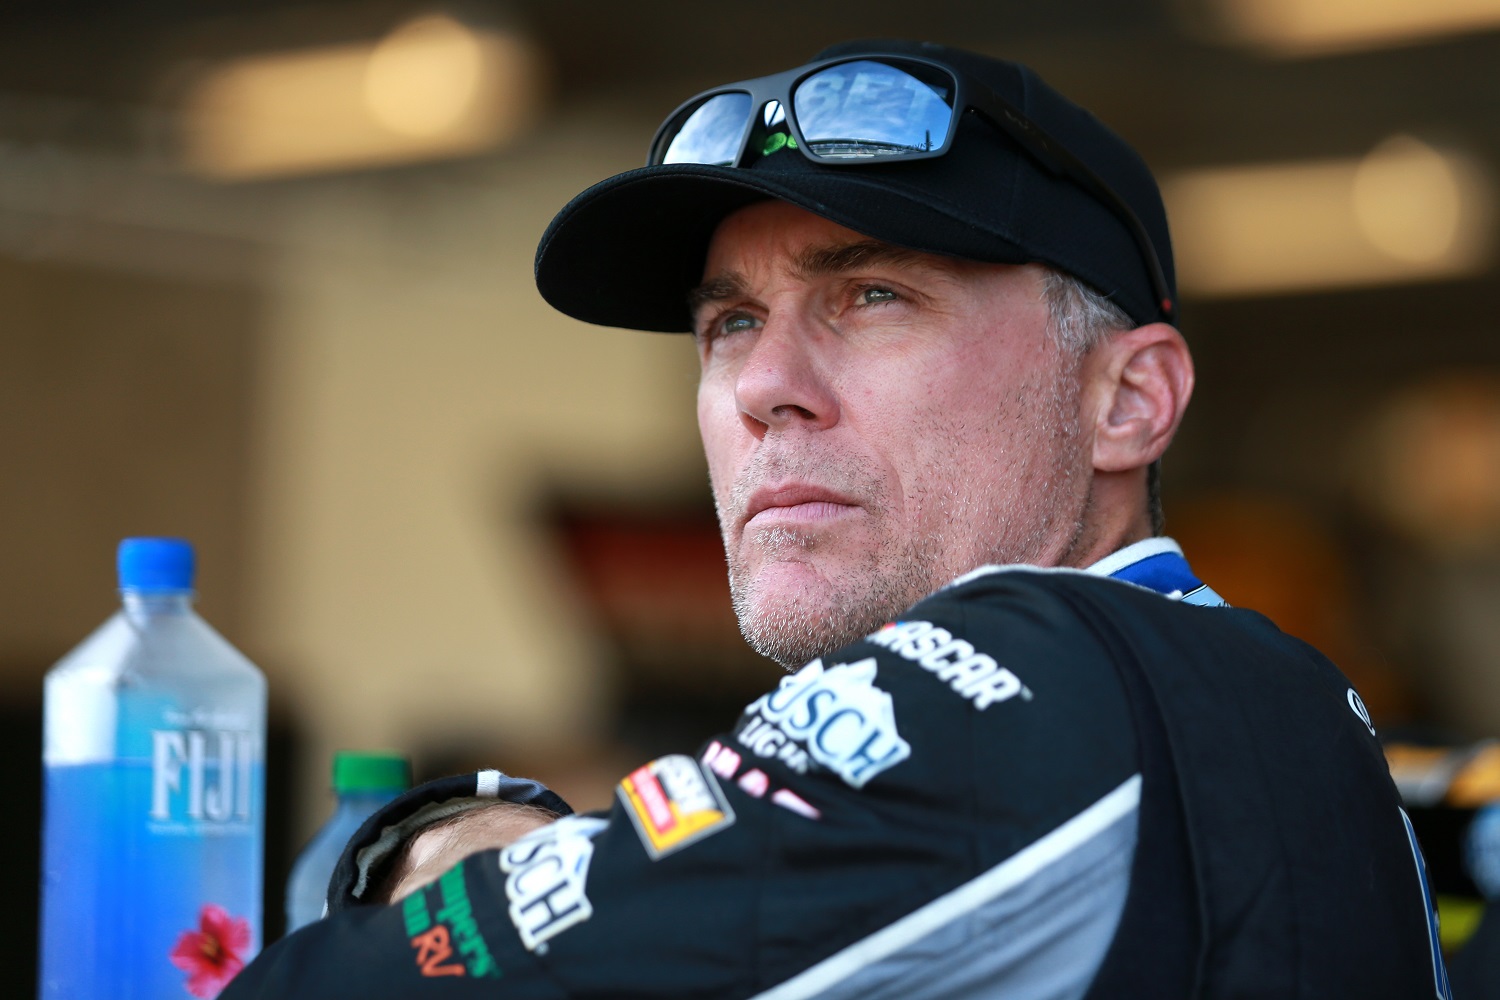 Kevin Harvick waits in the garage area during qualifying for the NASCAR Xfinity Series Pennzoil 150 at the Brickyard at Indianapolis Motor Speedway on Aug. 14, 2021.